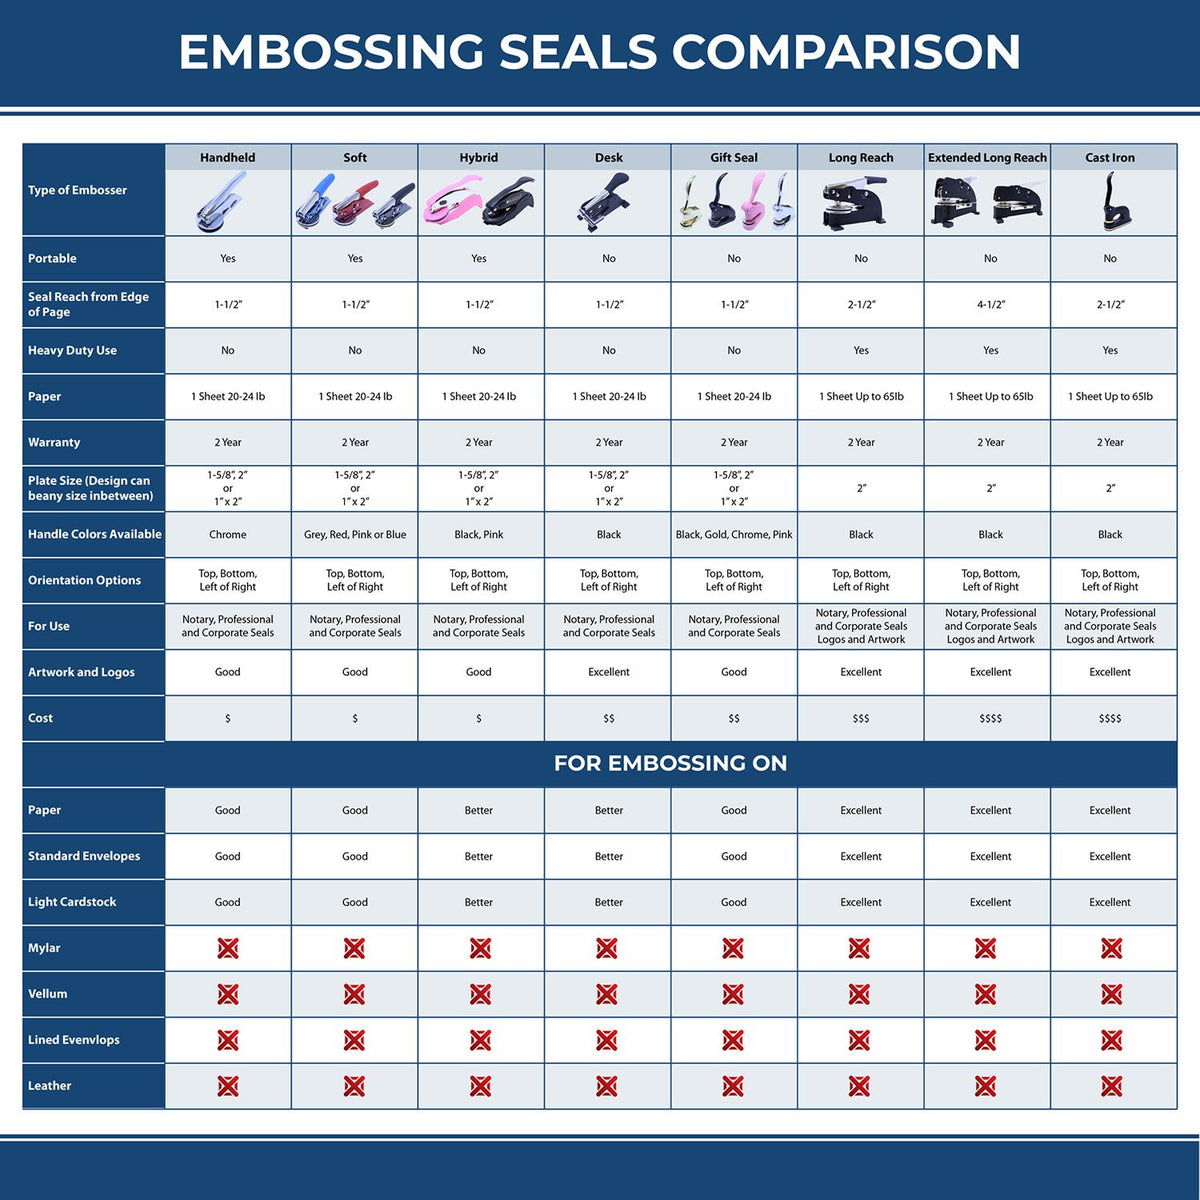 A comparison chart for the different types of mount models available for the Handheld Guam Professional Geologist Embosser